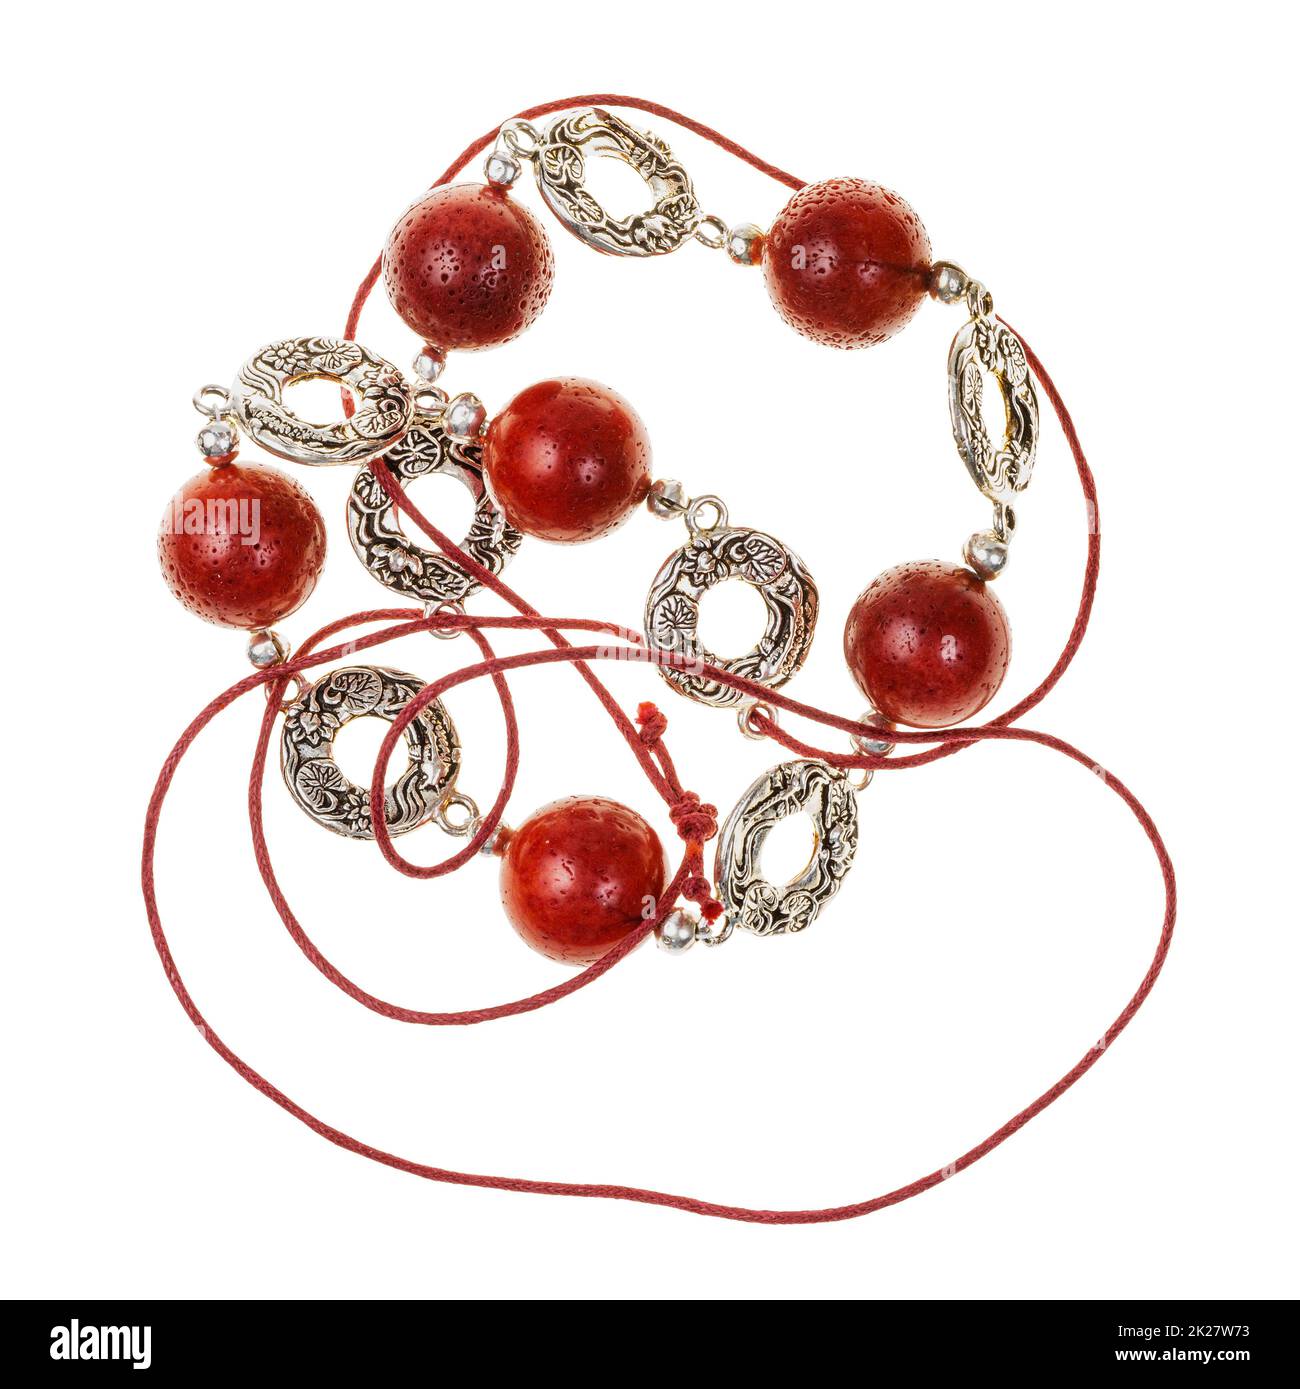 tangled handcrafted necklace of red coral balls Stock Photo